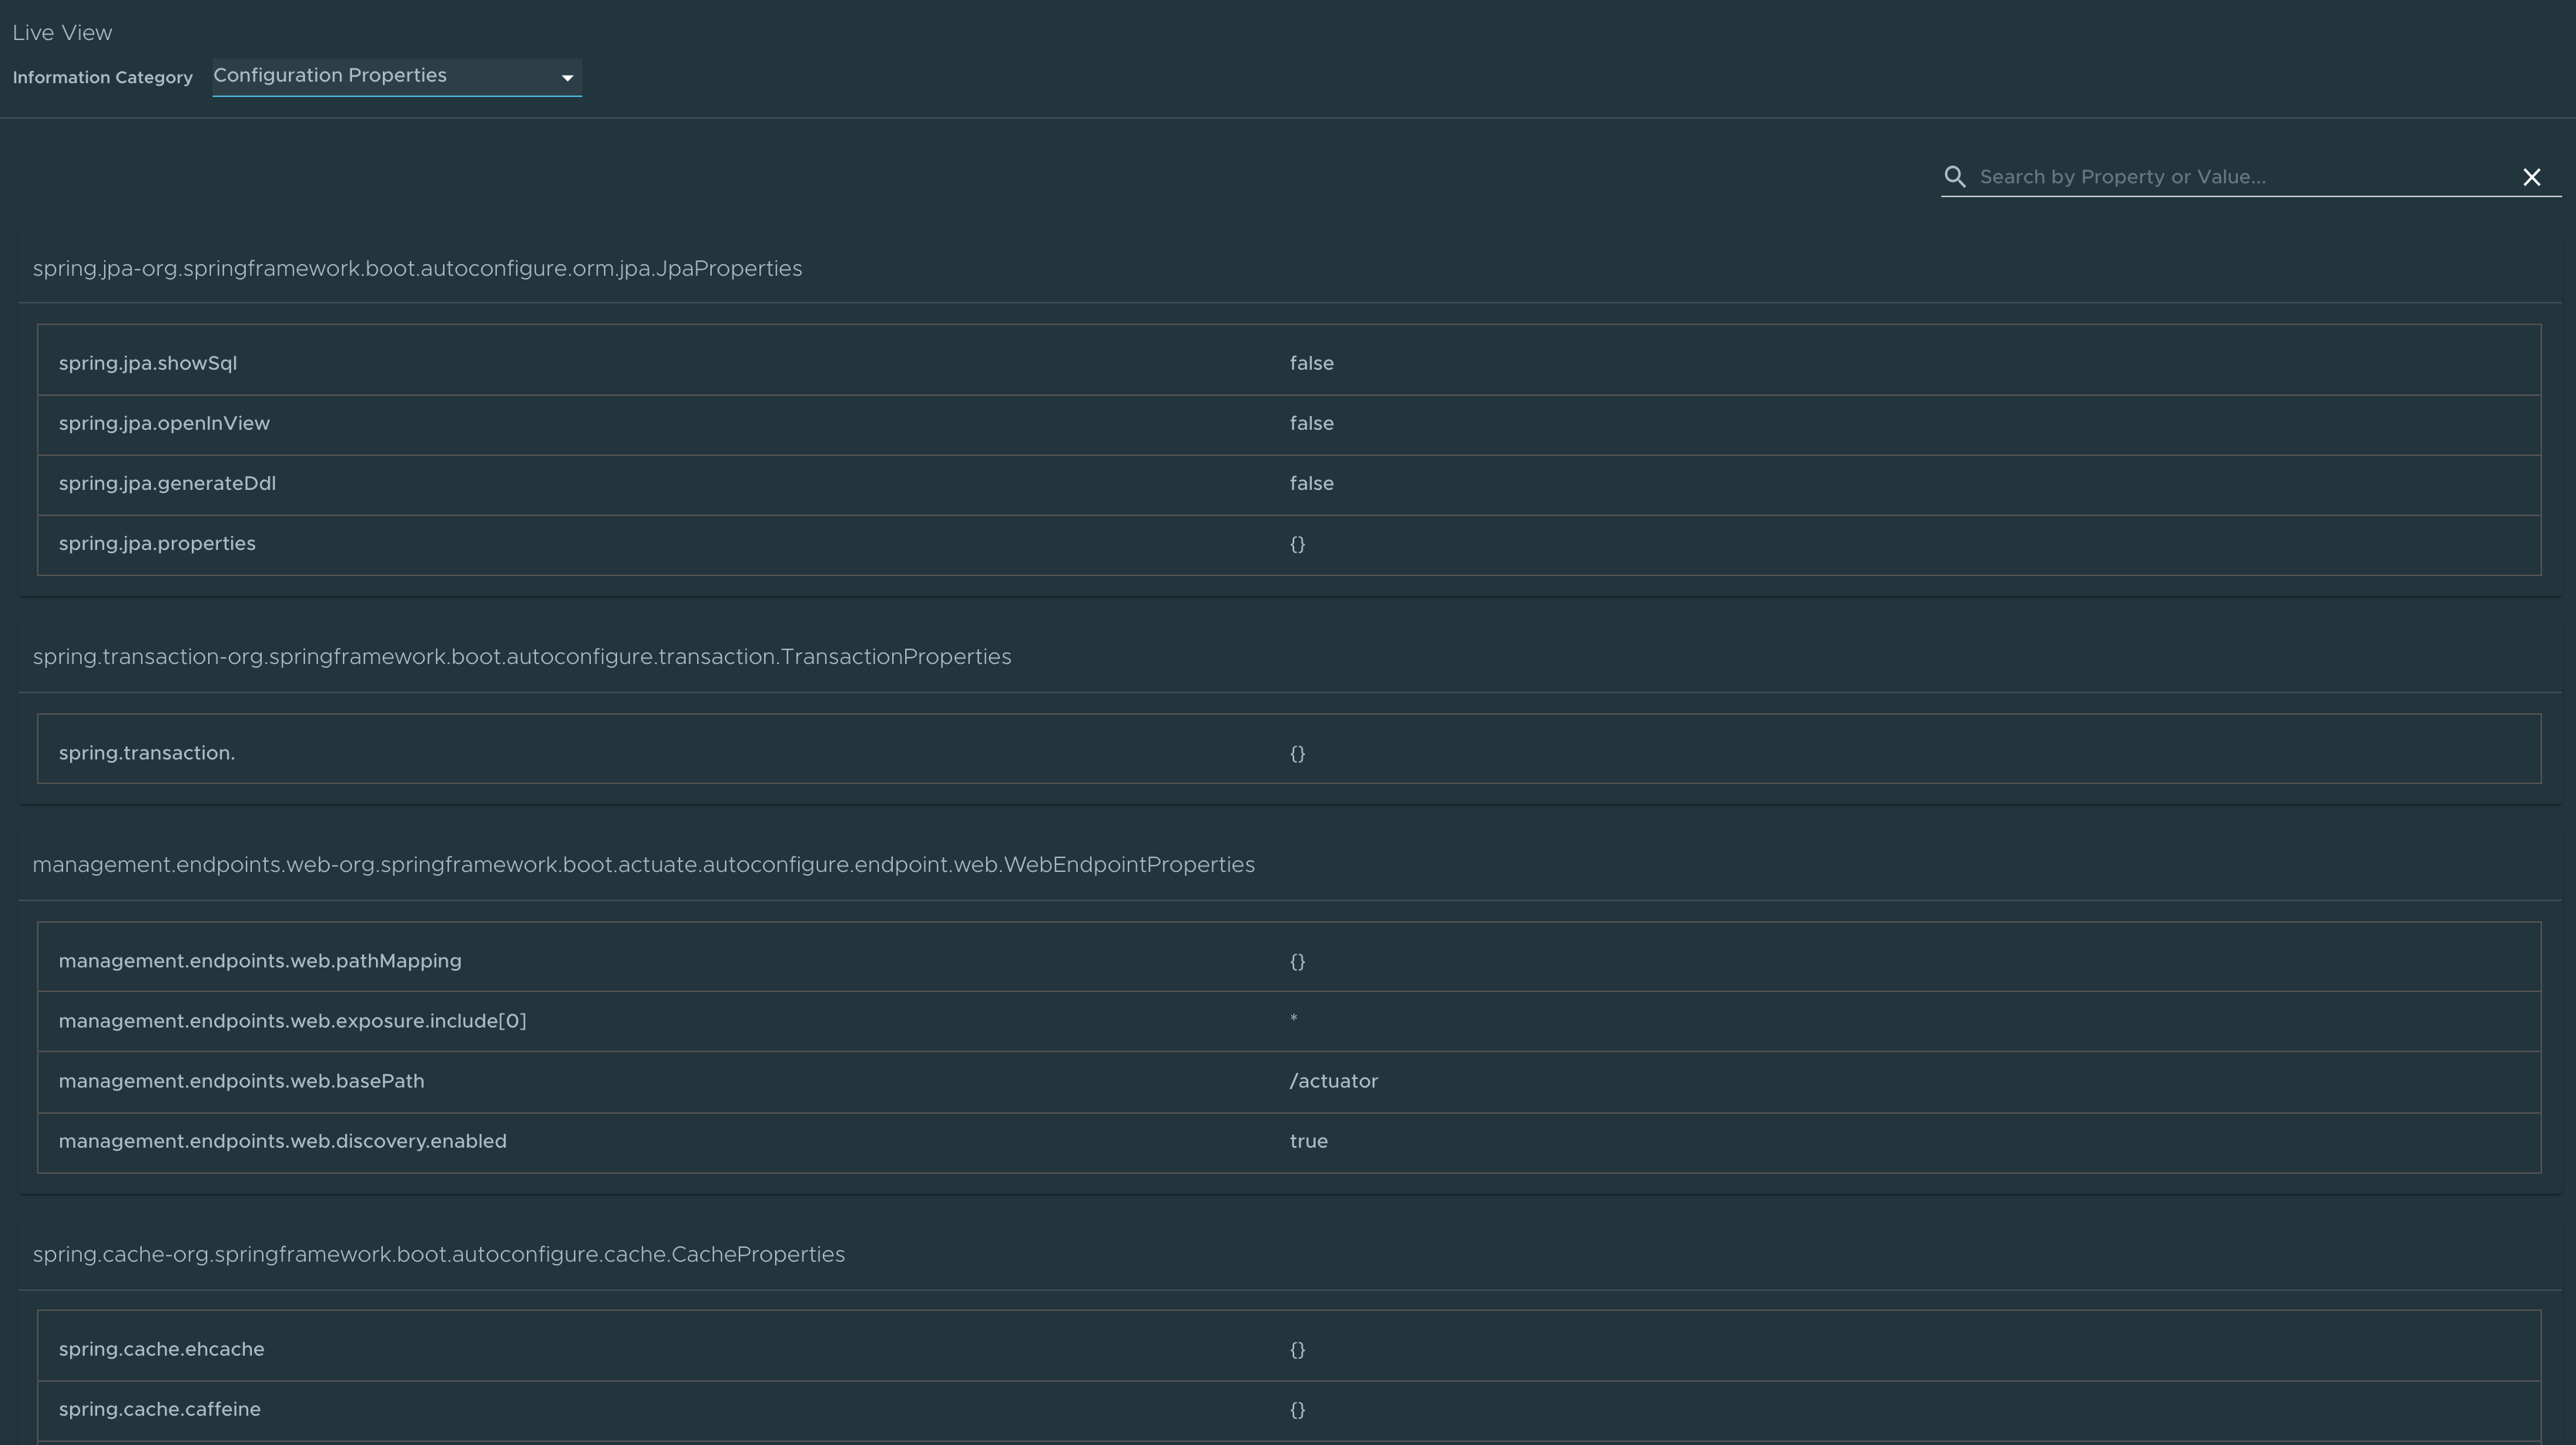 Screenshot of the Configuration Properties page in the Application Live View UI.